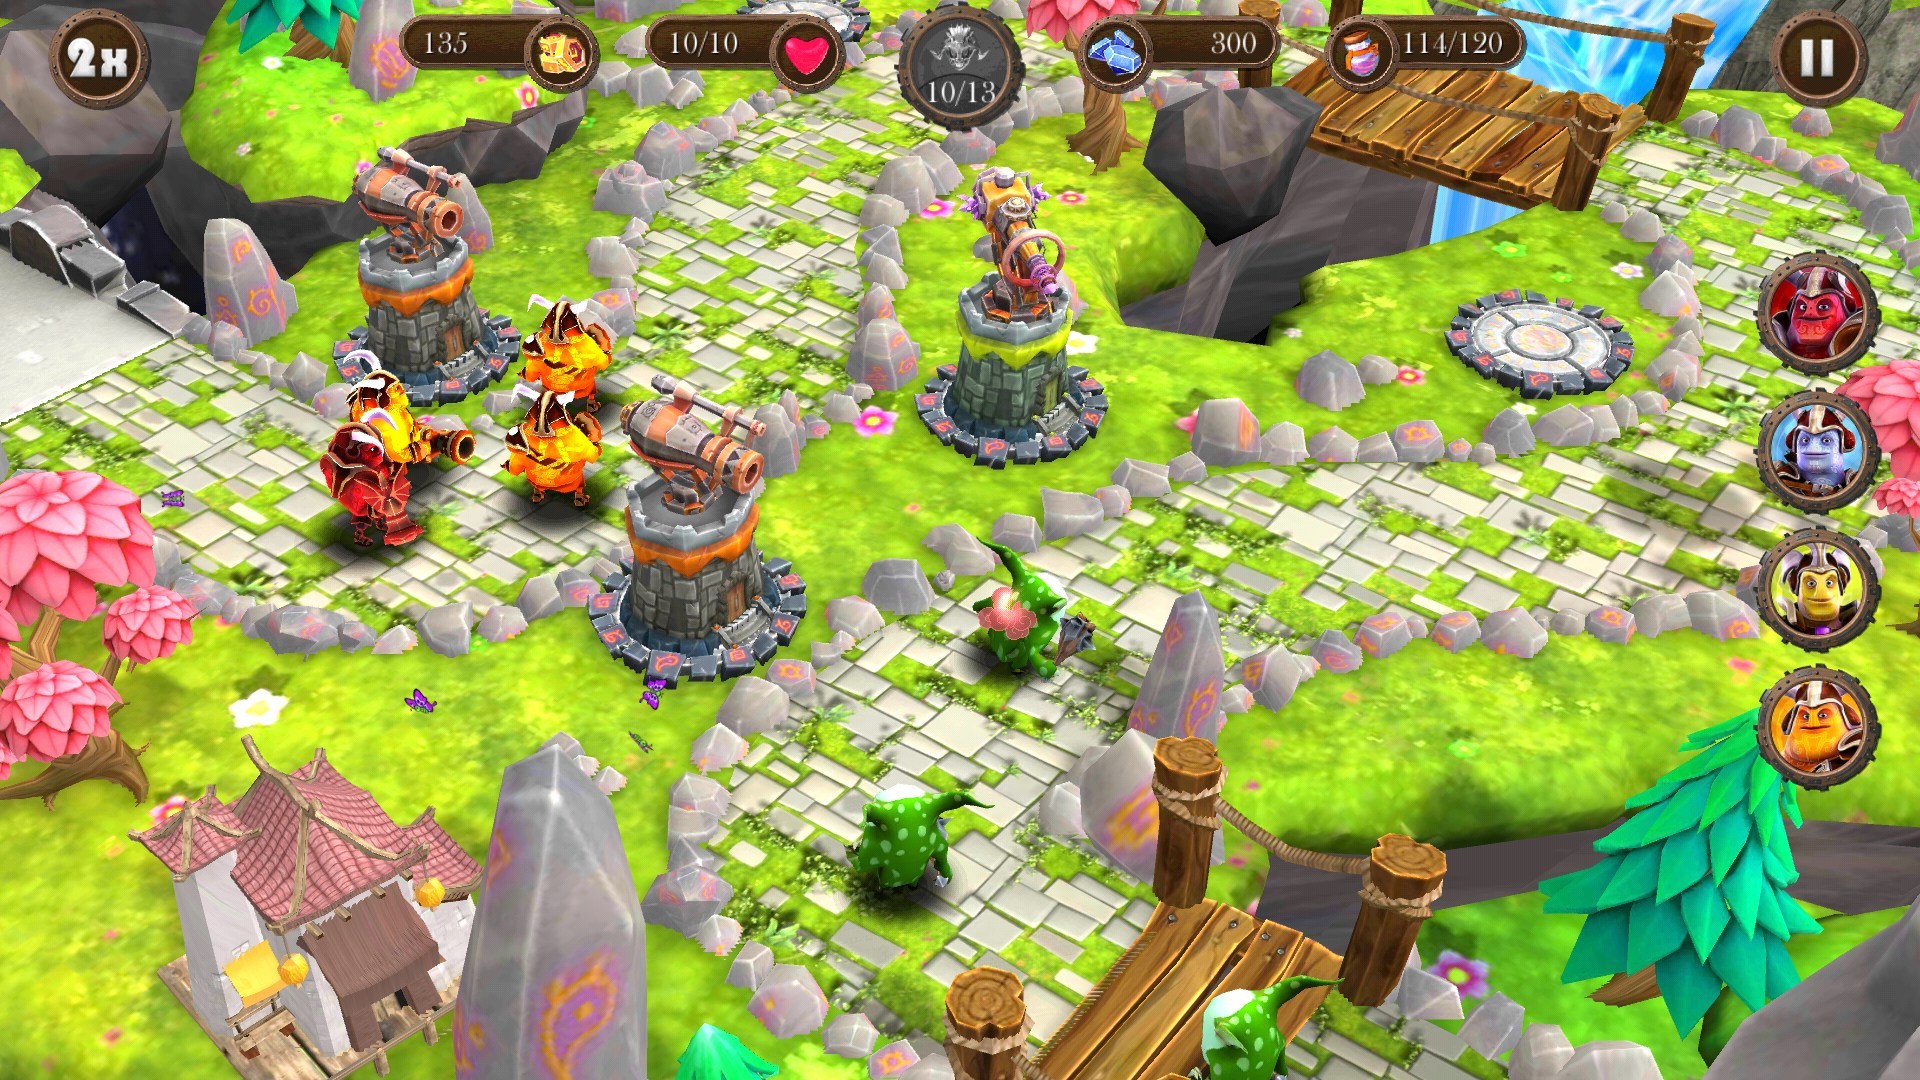 The 3D action fantasy tower defense game Brave Guardians is now FREE on iOS  (Reg. $2)